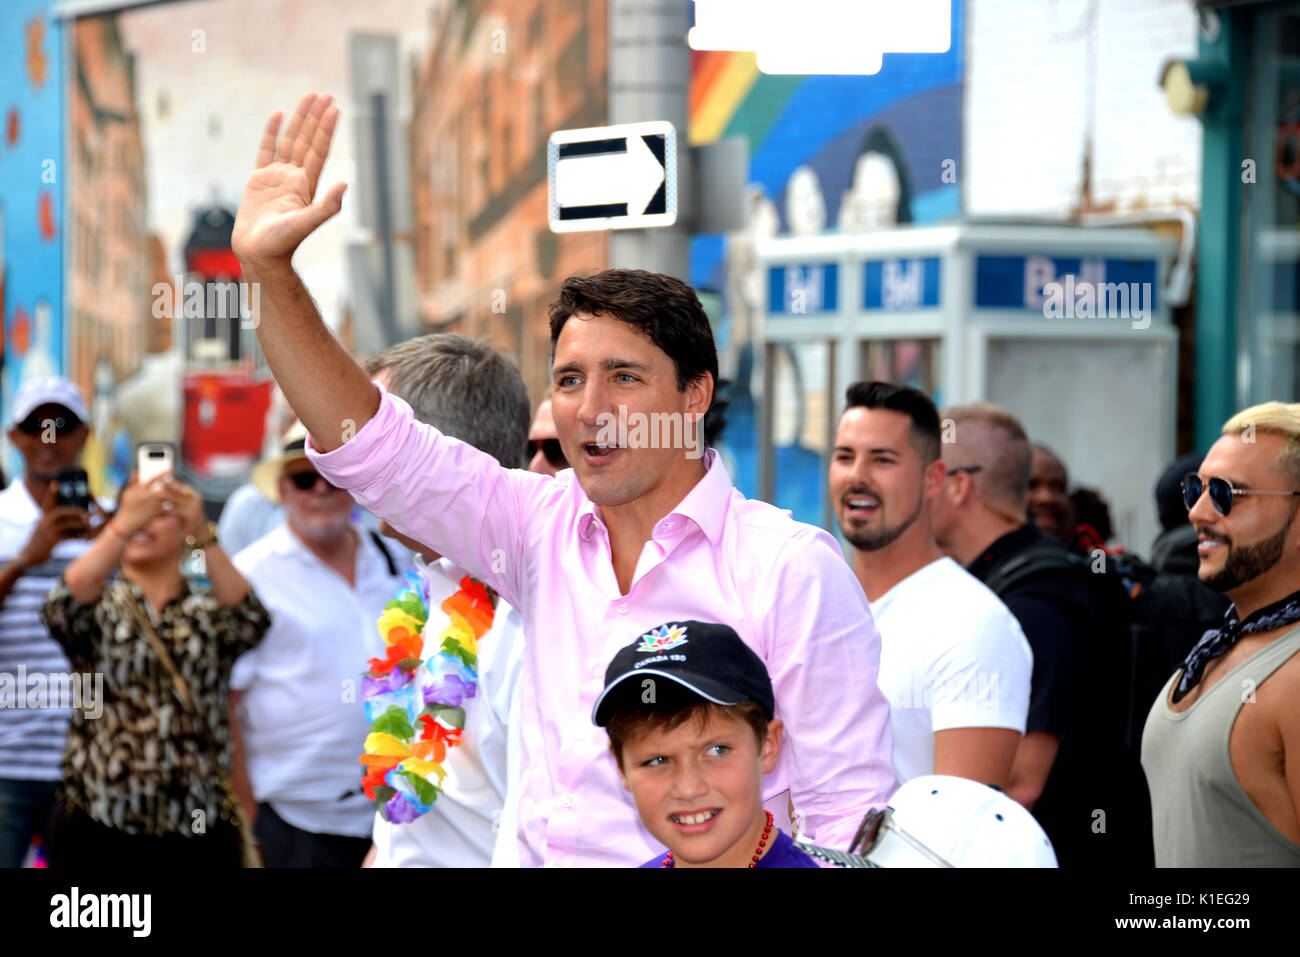 Ottawa, Canada. 27th Aug, 2017. Canadian Prime Minister Justin Trudeau, with son Xavier, marches in the Ottawa Pride Parade, becoming to first sitting PM to participate in that event for the city. Credit: Paul McKinnon/Alamy Live News Stock Photo